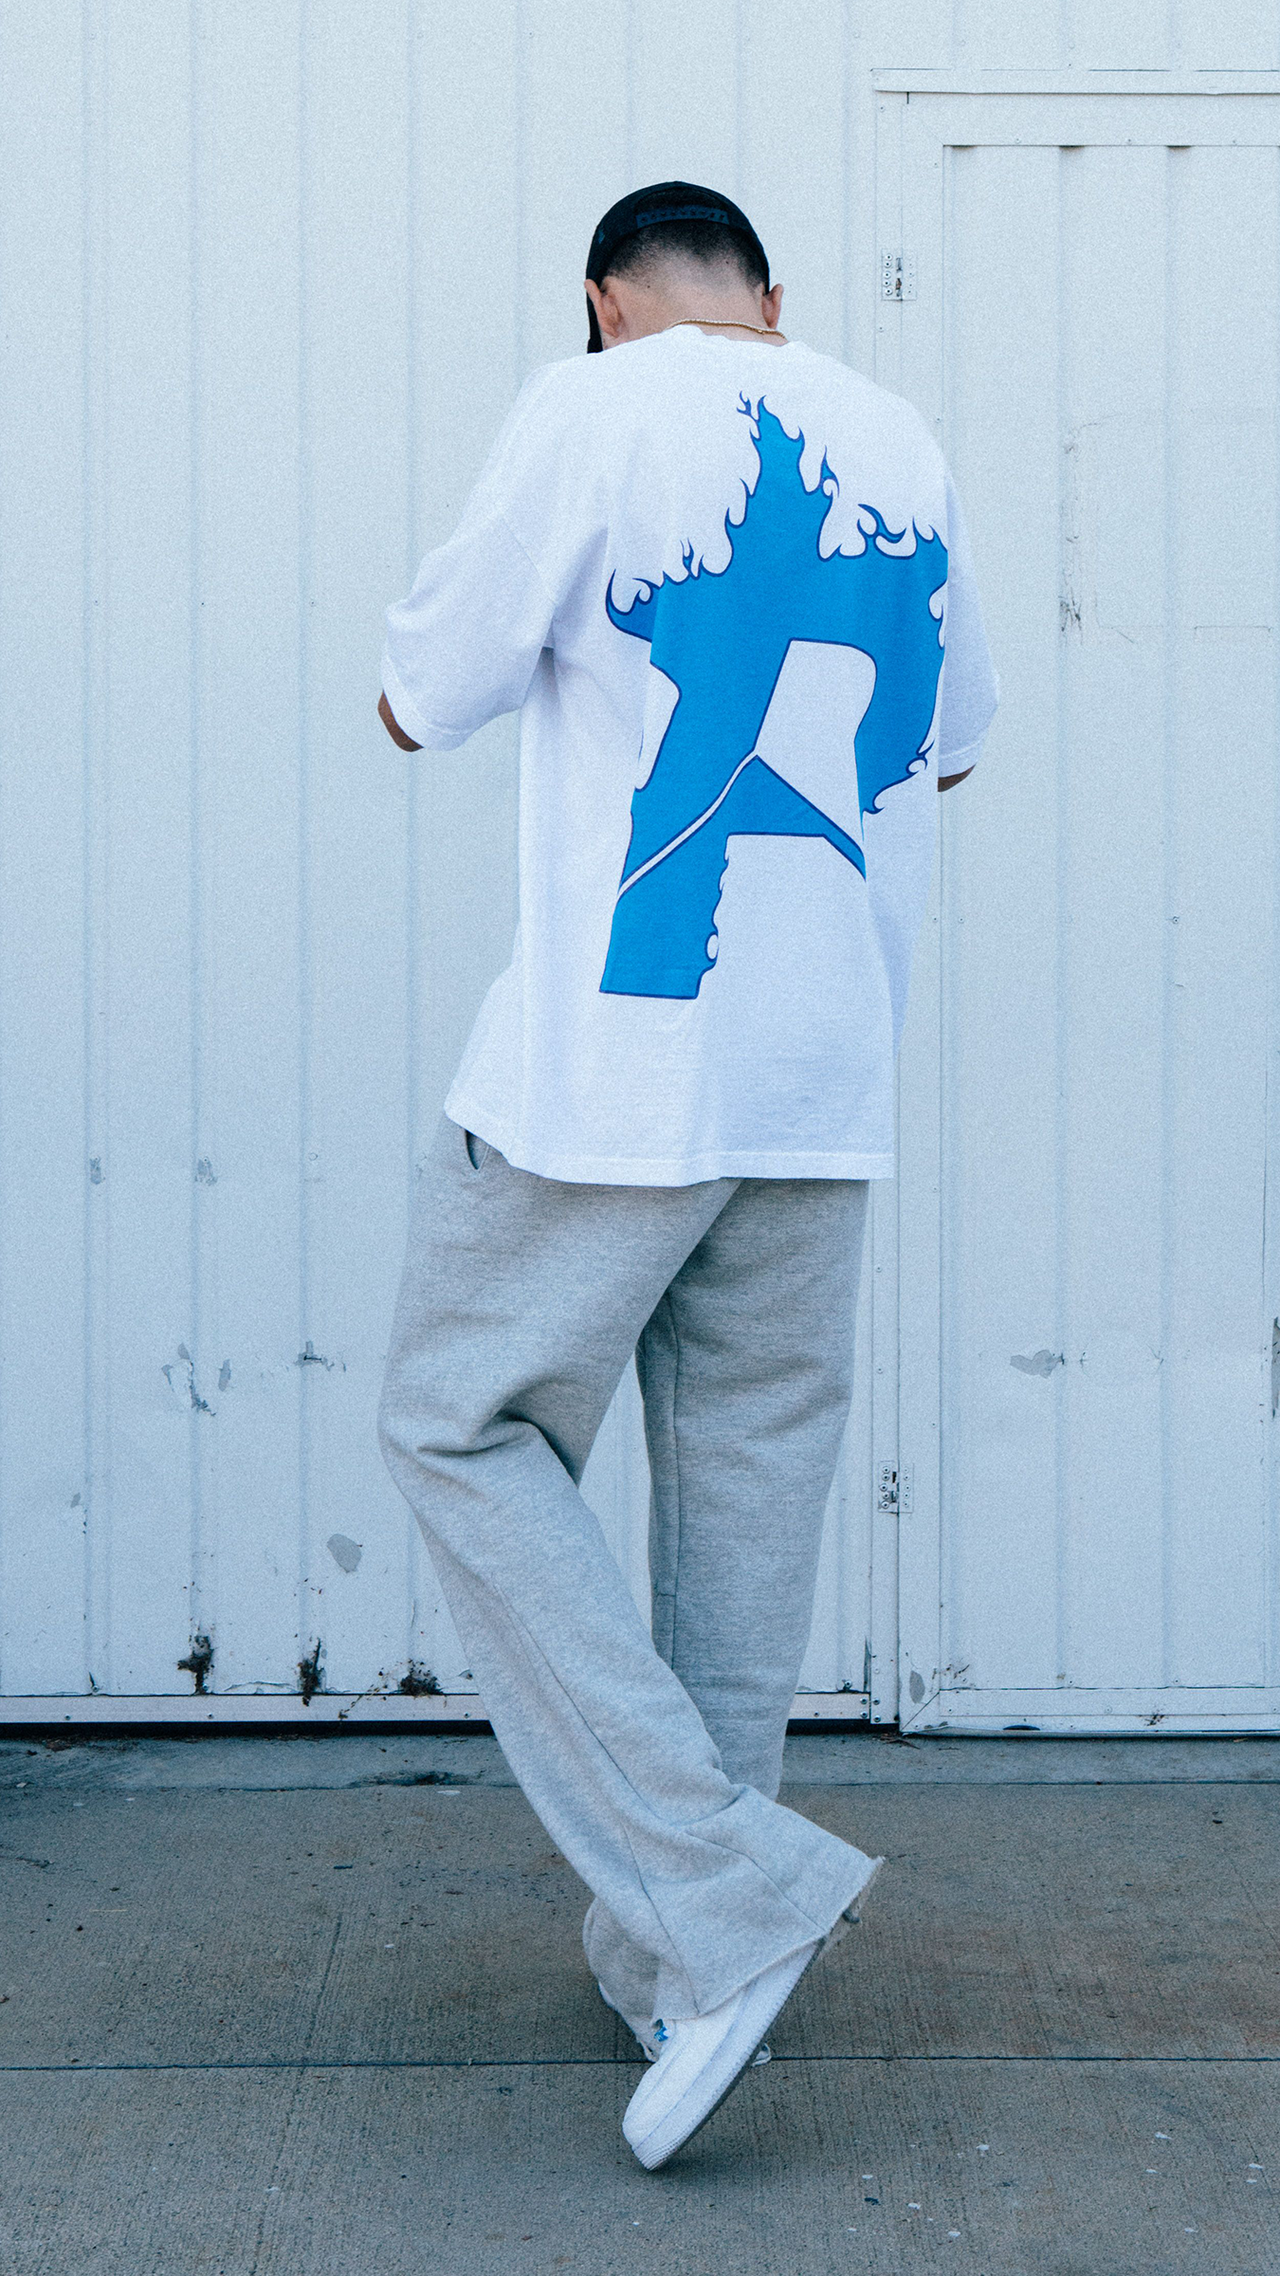 Check out this outfit breakdown ✓ Full fit available now online at  pieceslosangeles.com